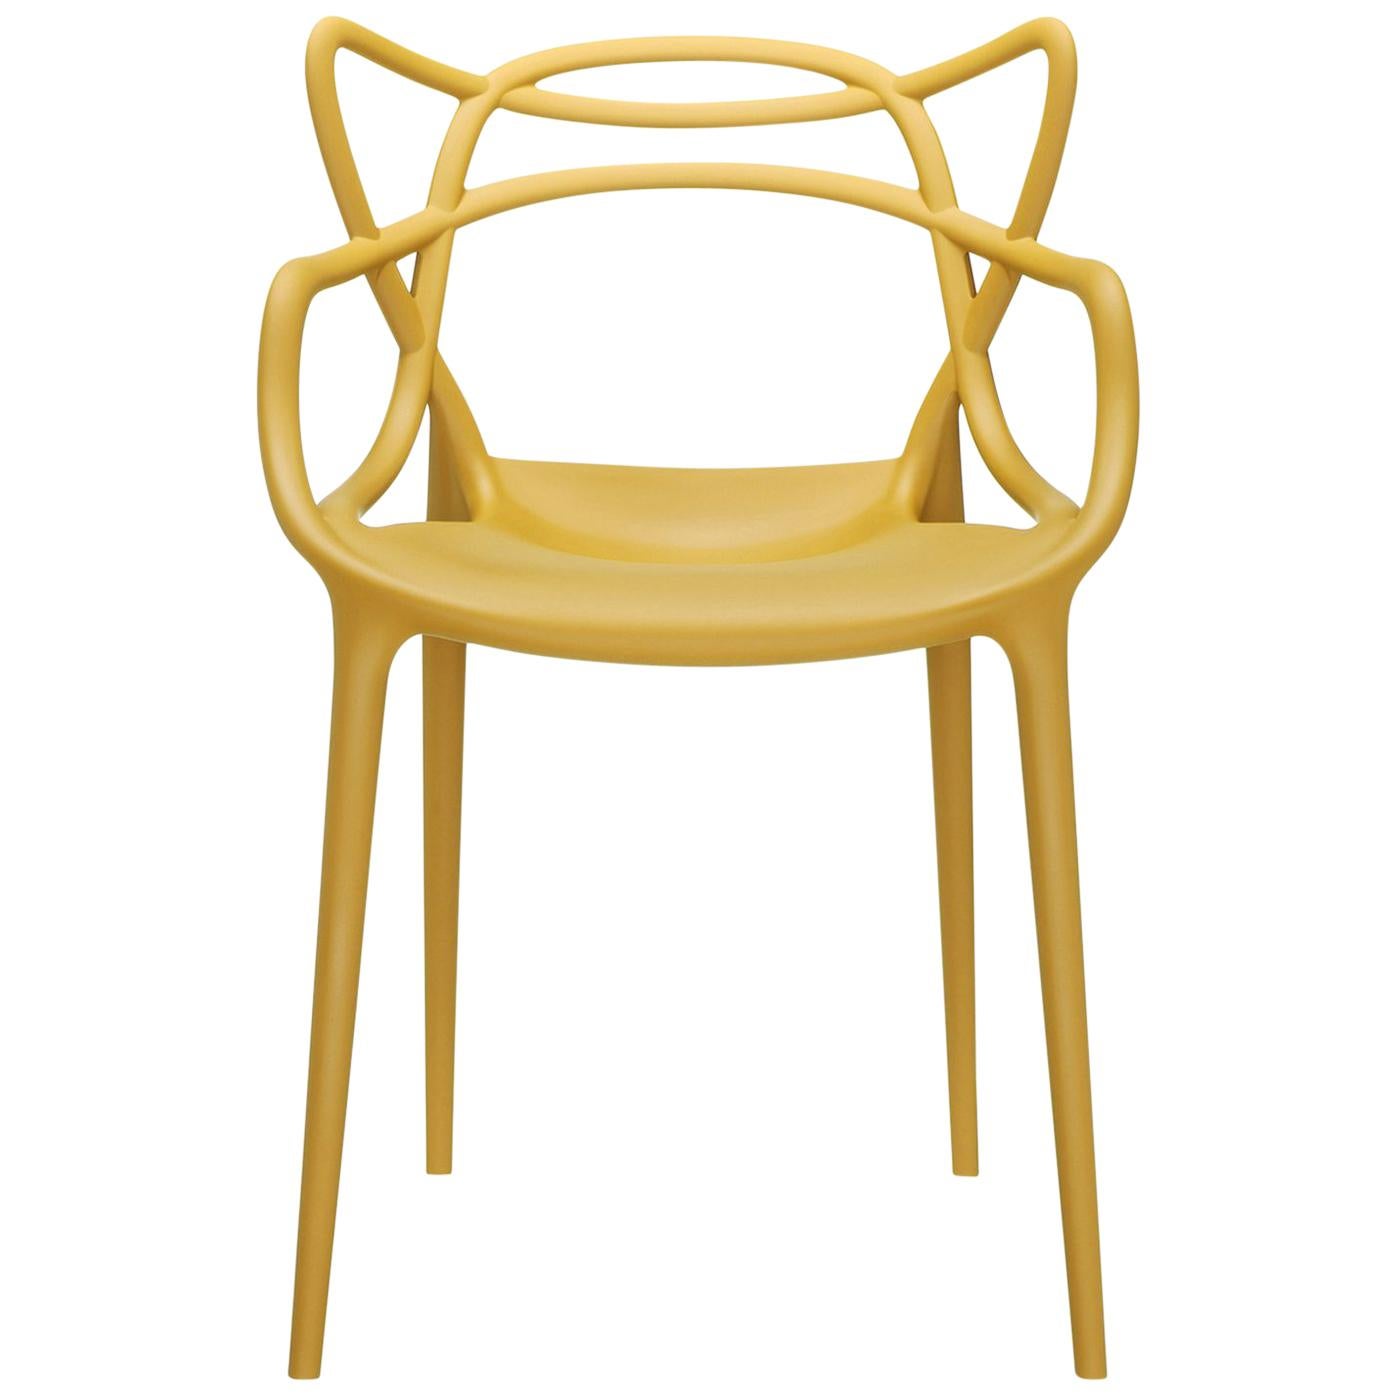 Set of 2 Kartell Masters Chairs in Mustard by Philippe Starck & Eugeni Quitllet